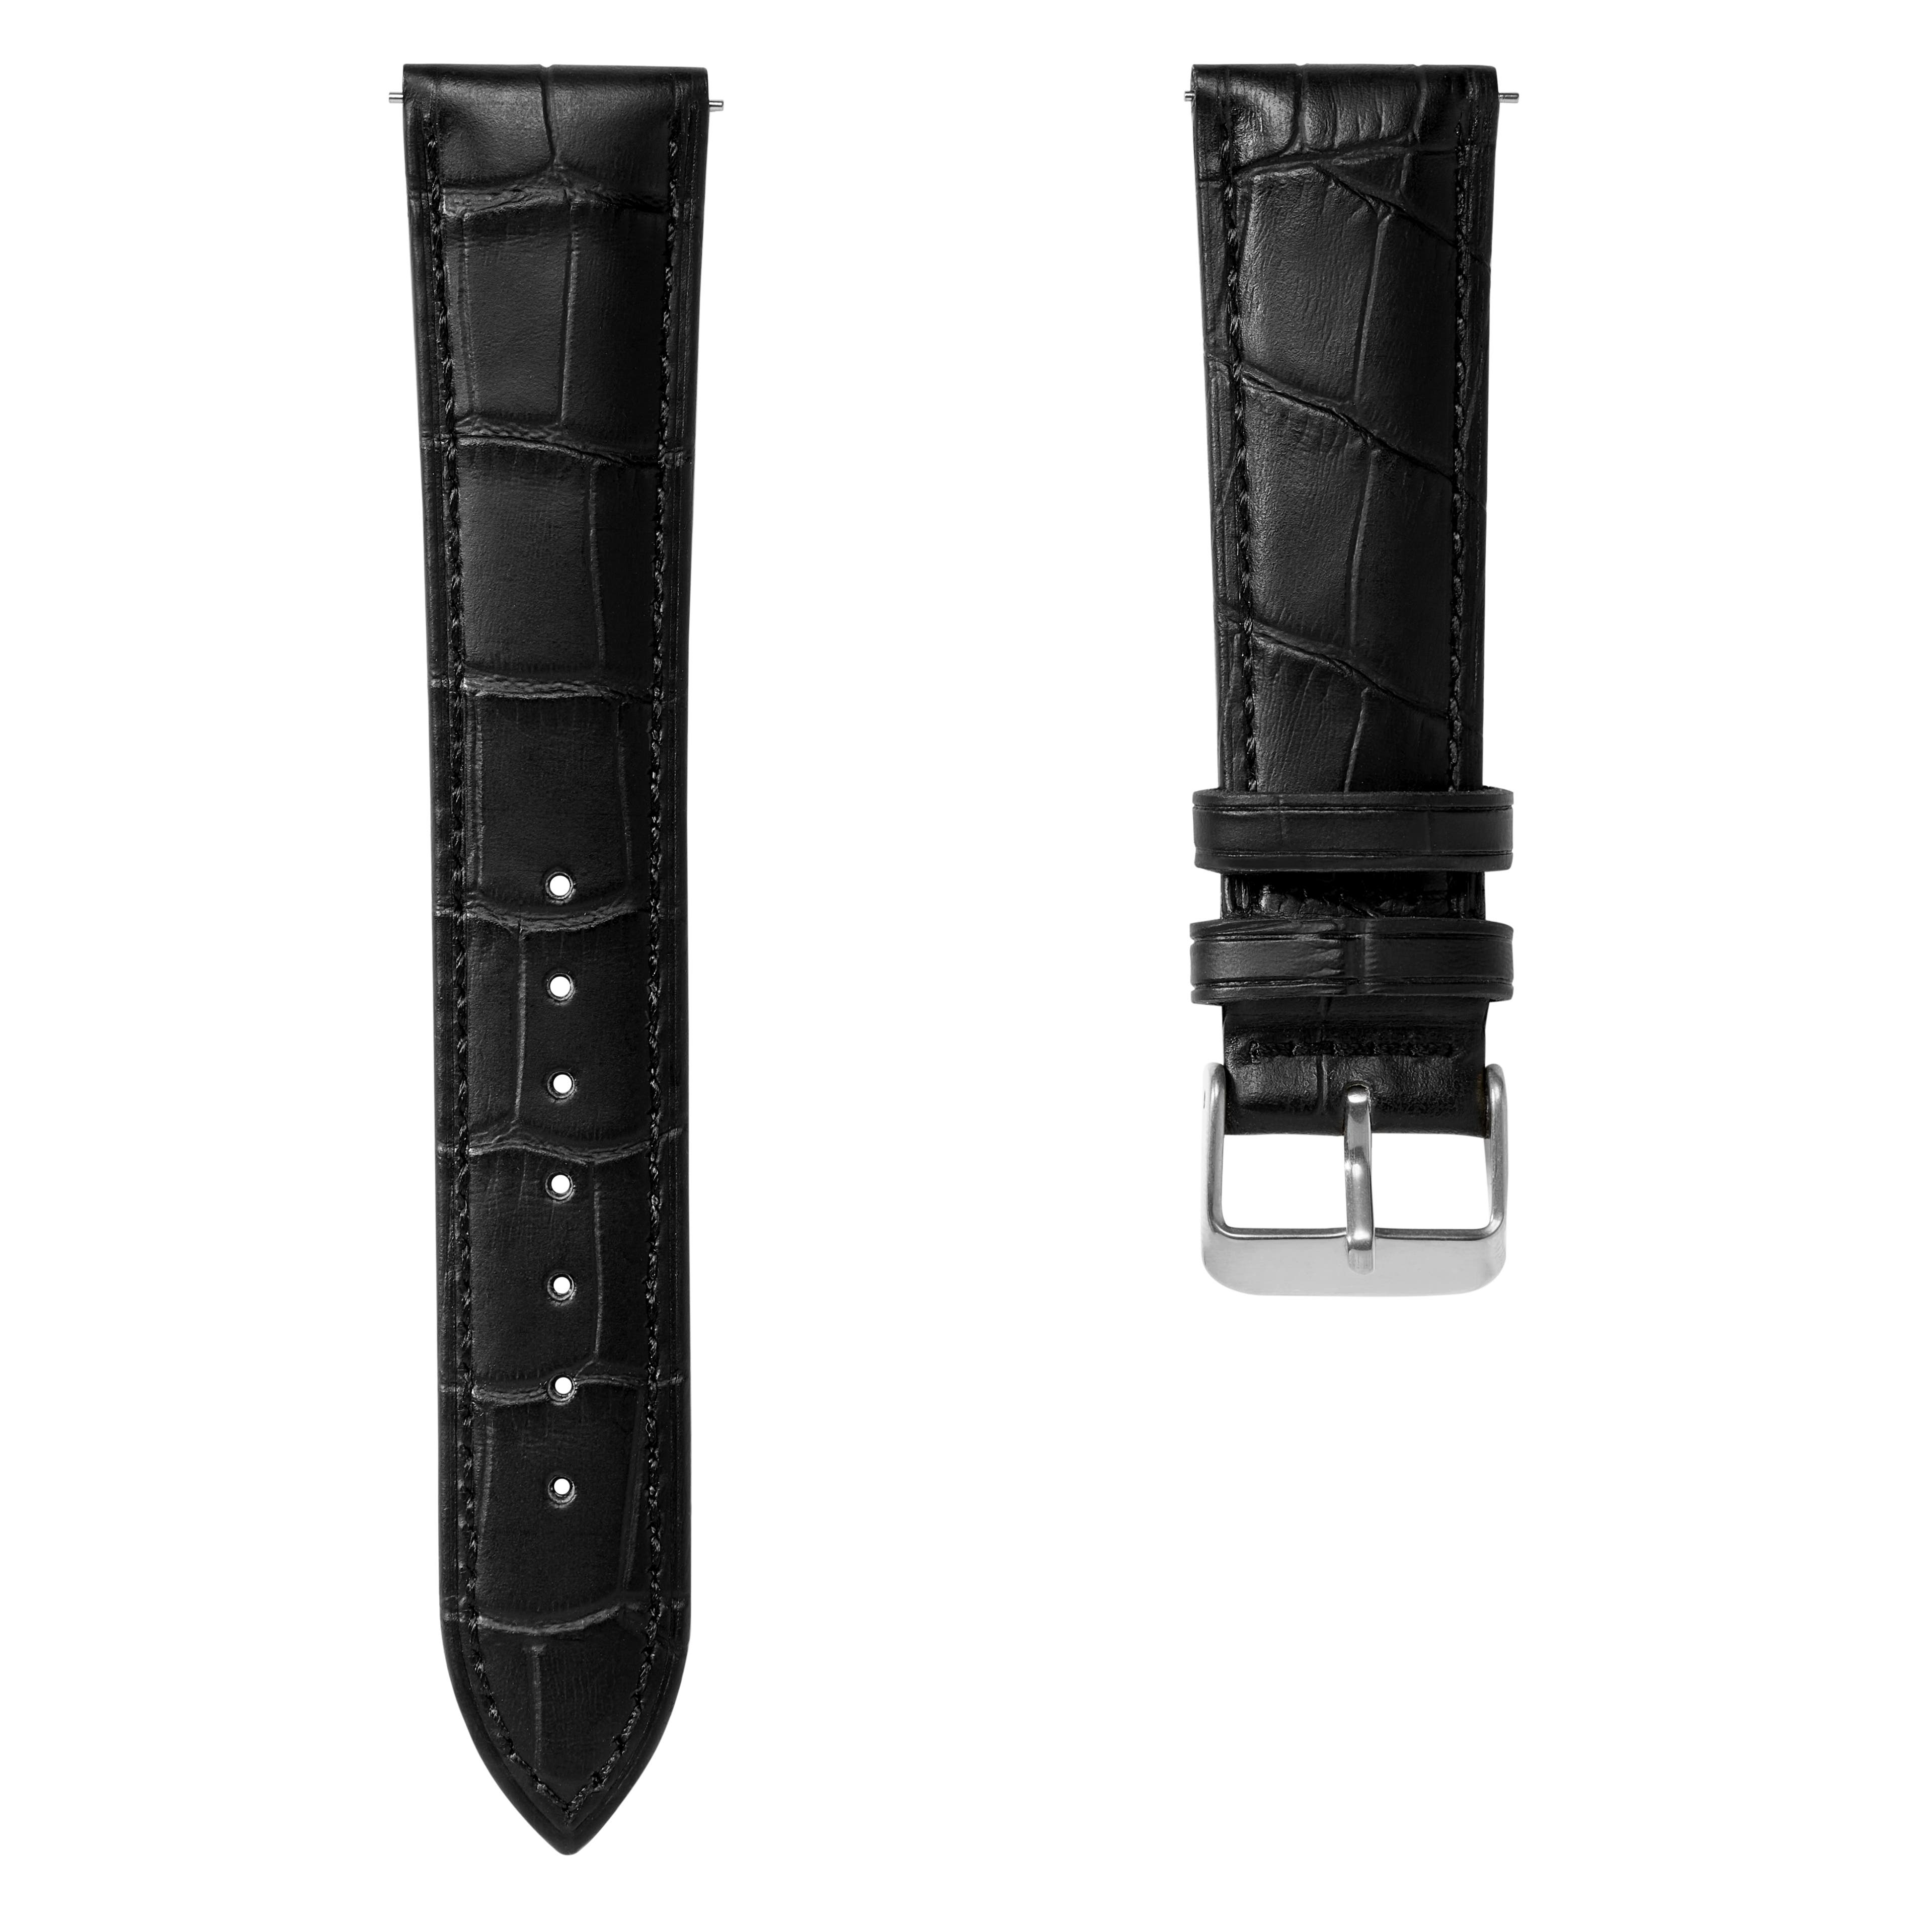 22 mm Crocodile-Embossed Black Leather Watch Strap with Silver-Tone Buckle – Quick Release